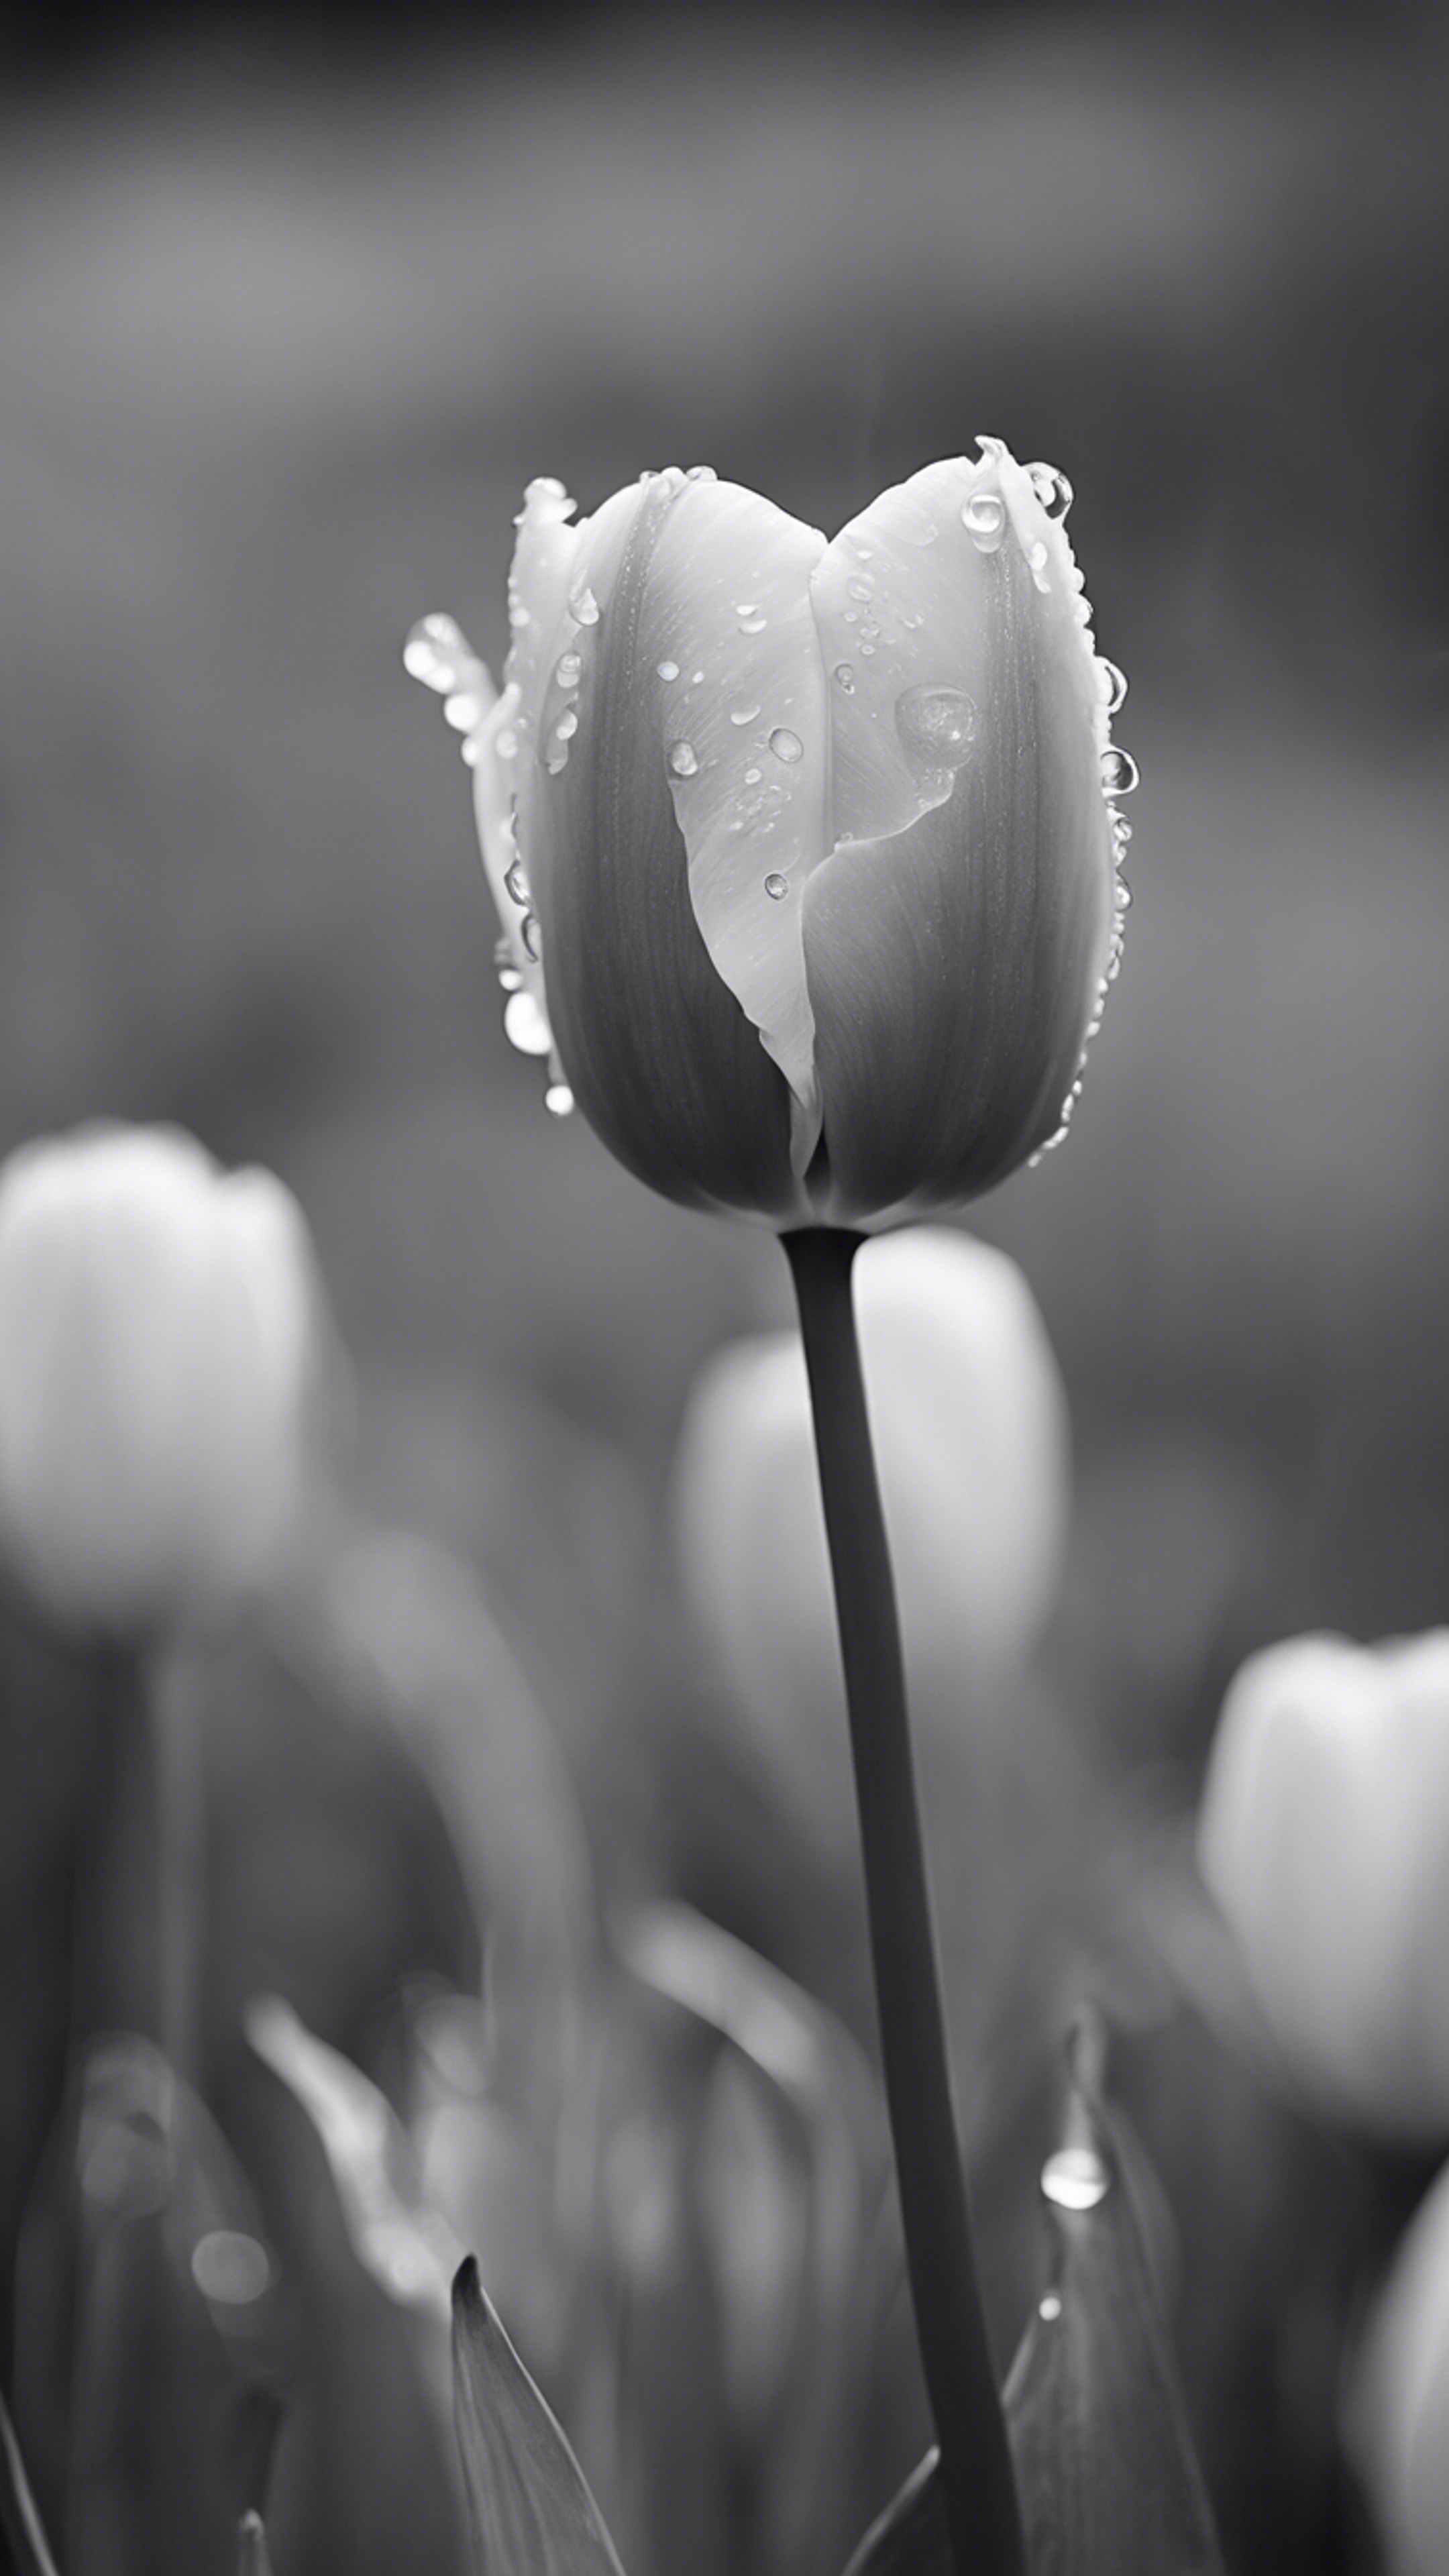 A black-and-white photograph of a tulip in full bloom in the rain. کاغذ دیواری[646ce87a121a4320b6e6]